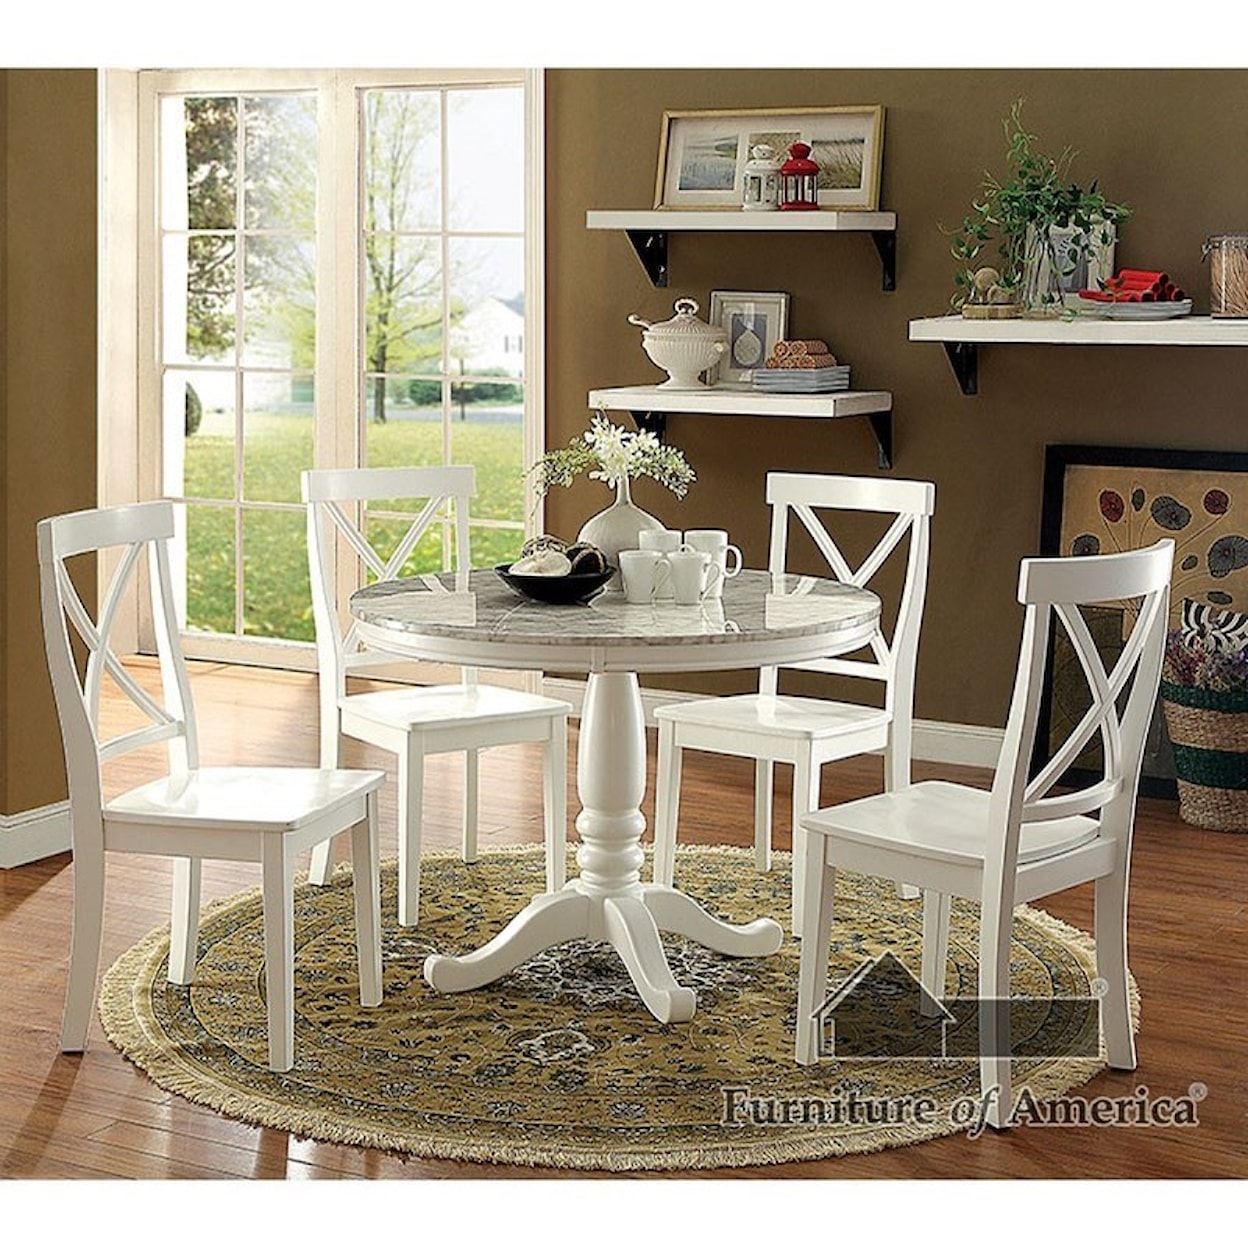 Furniture of America Penelope Dining Set with Round Table